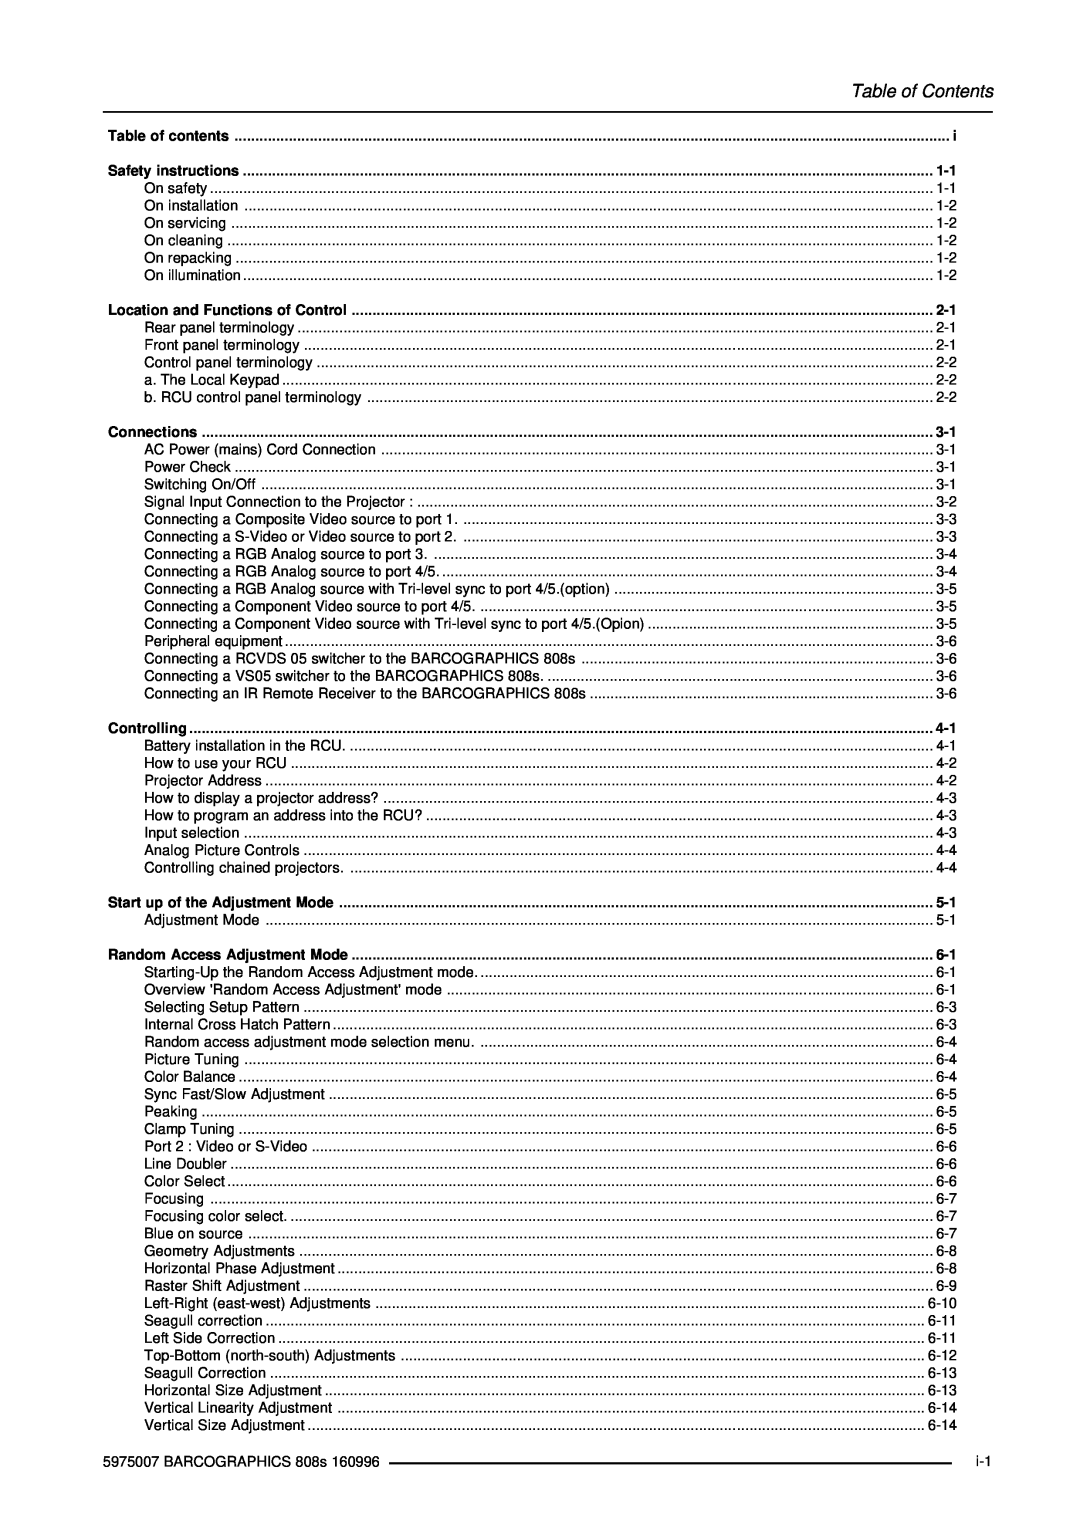 Barco R9000908, R9000901 owner manual Table of Contents, Table of contents 